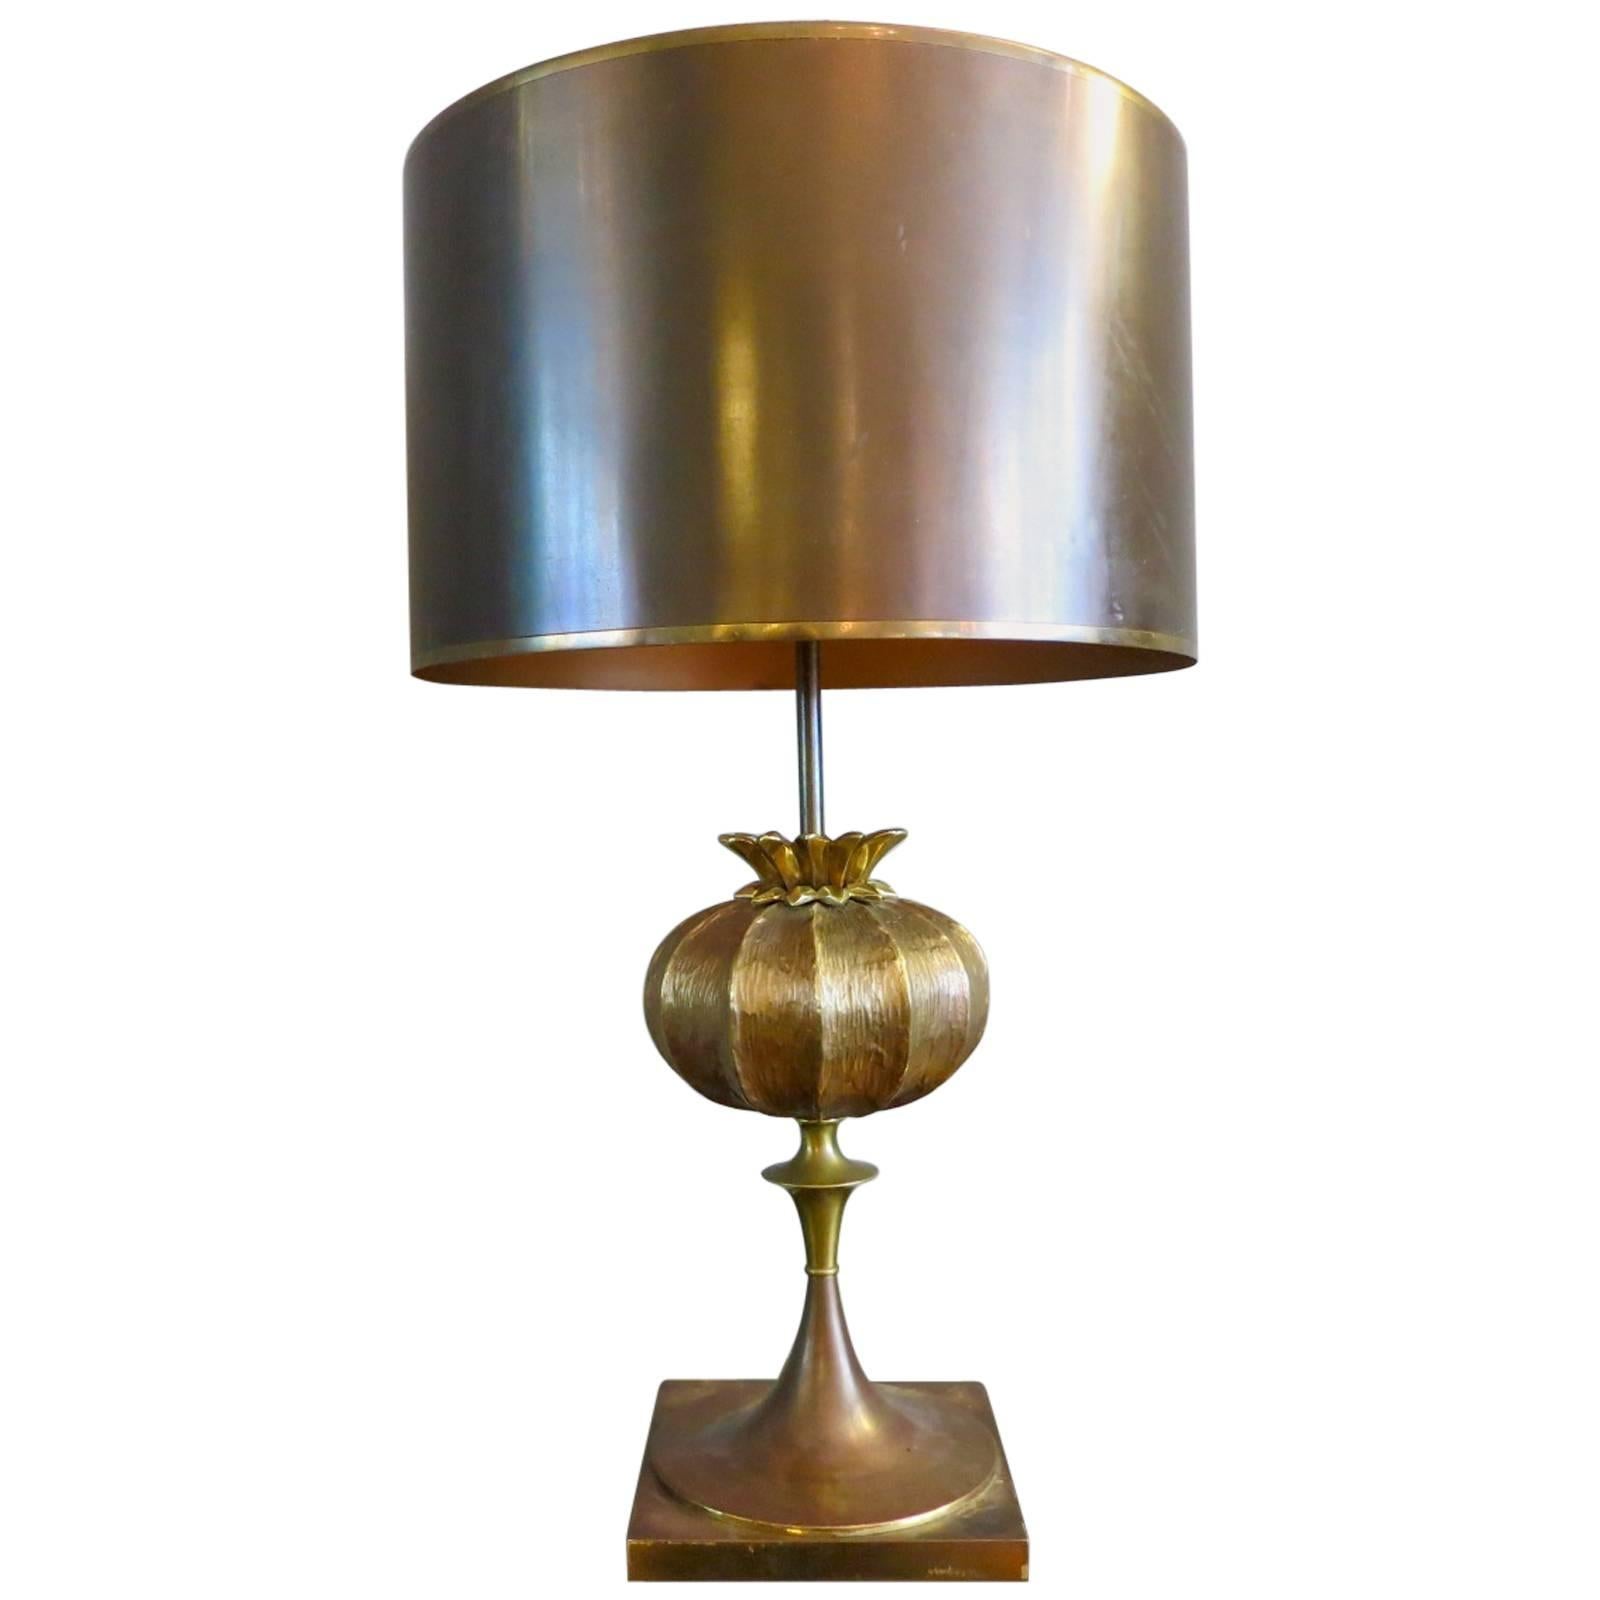 Maison Charles Bronze French Table Lamp